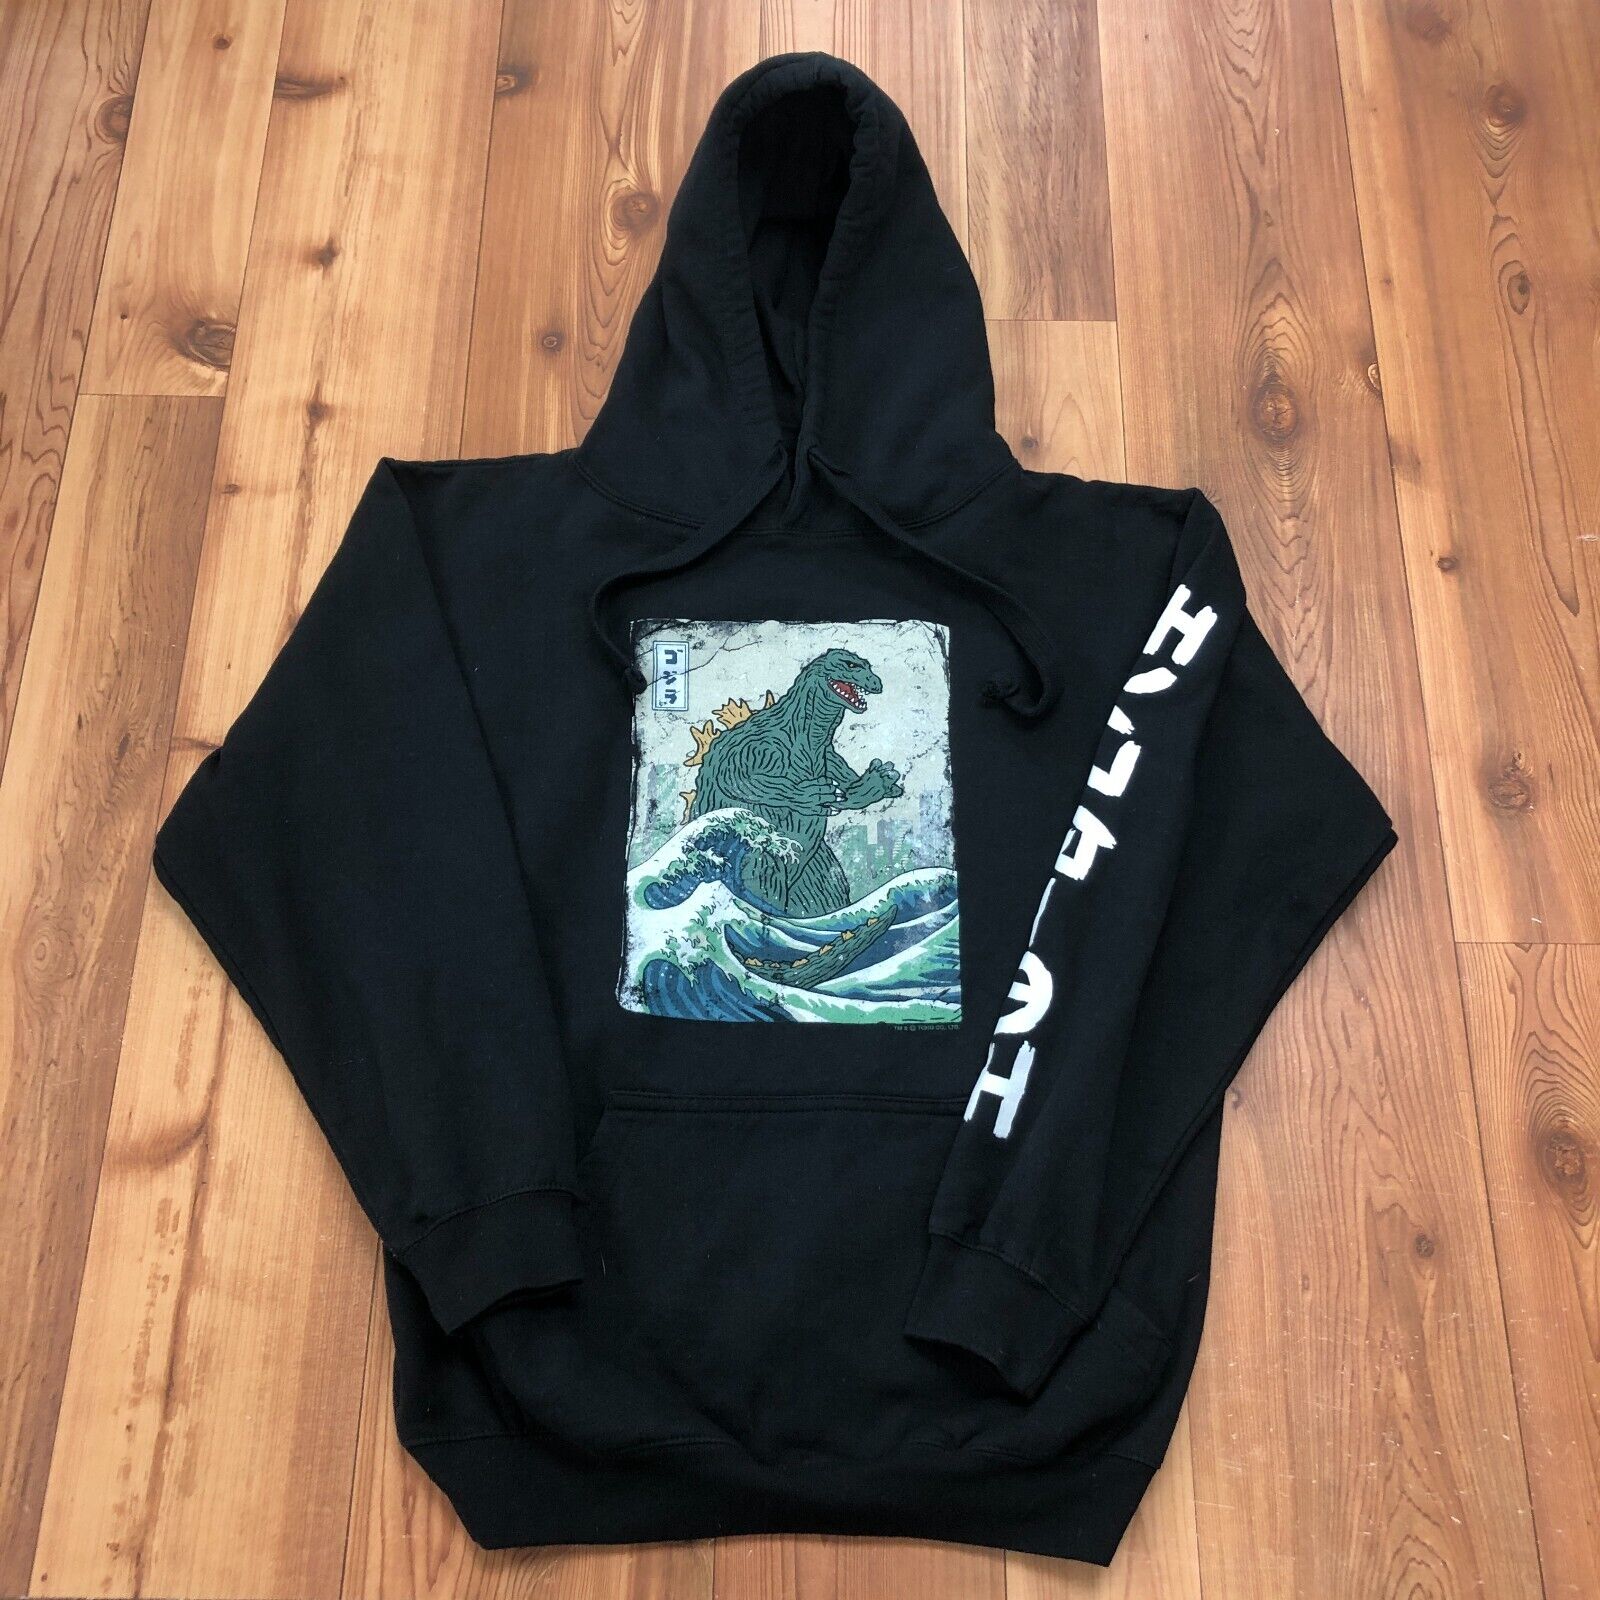 Black Godzilla Long Sleeve Great Wave Japanese Pullover Hoodie Adult Size M